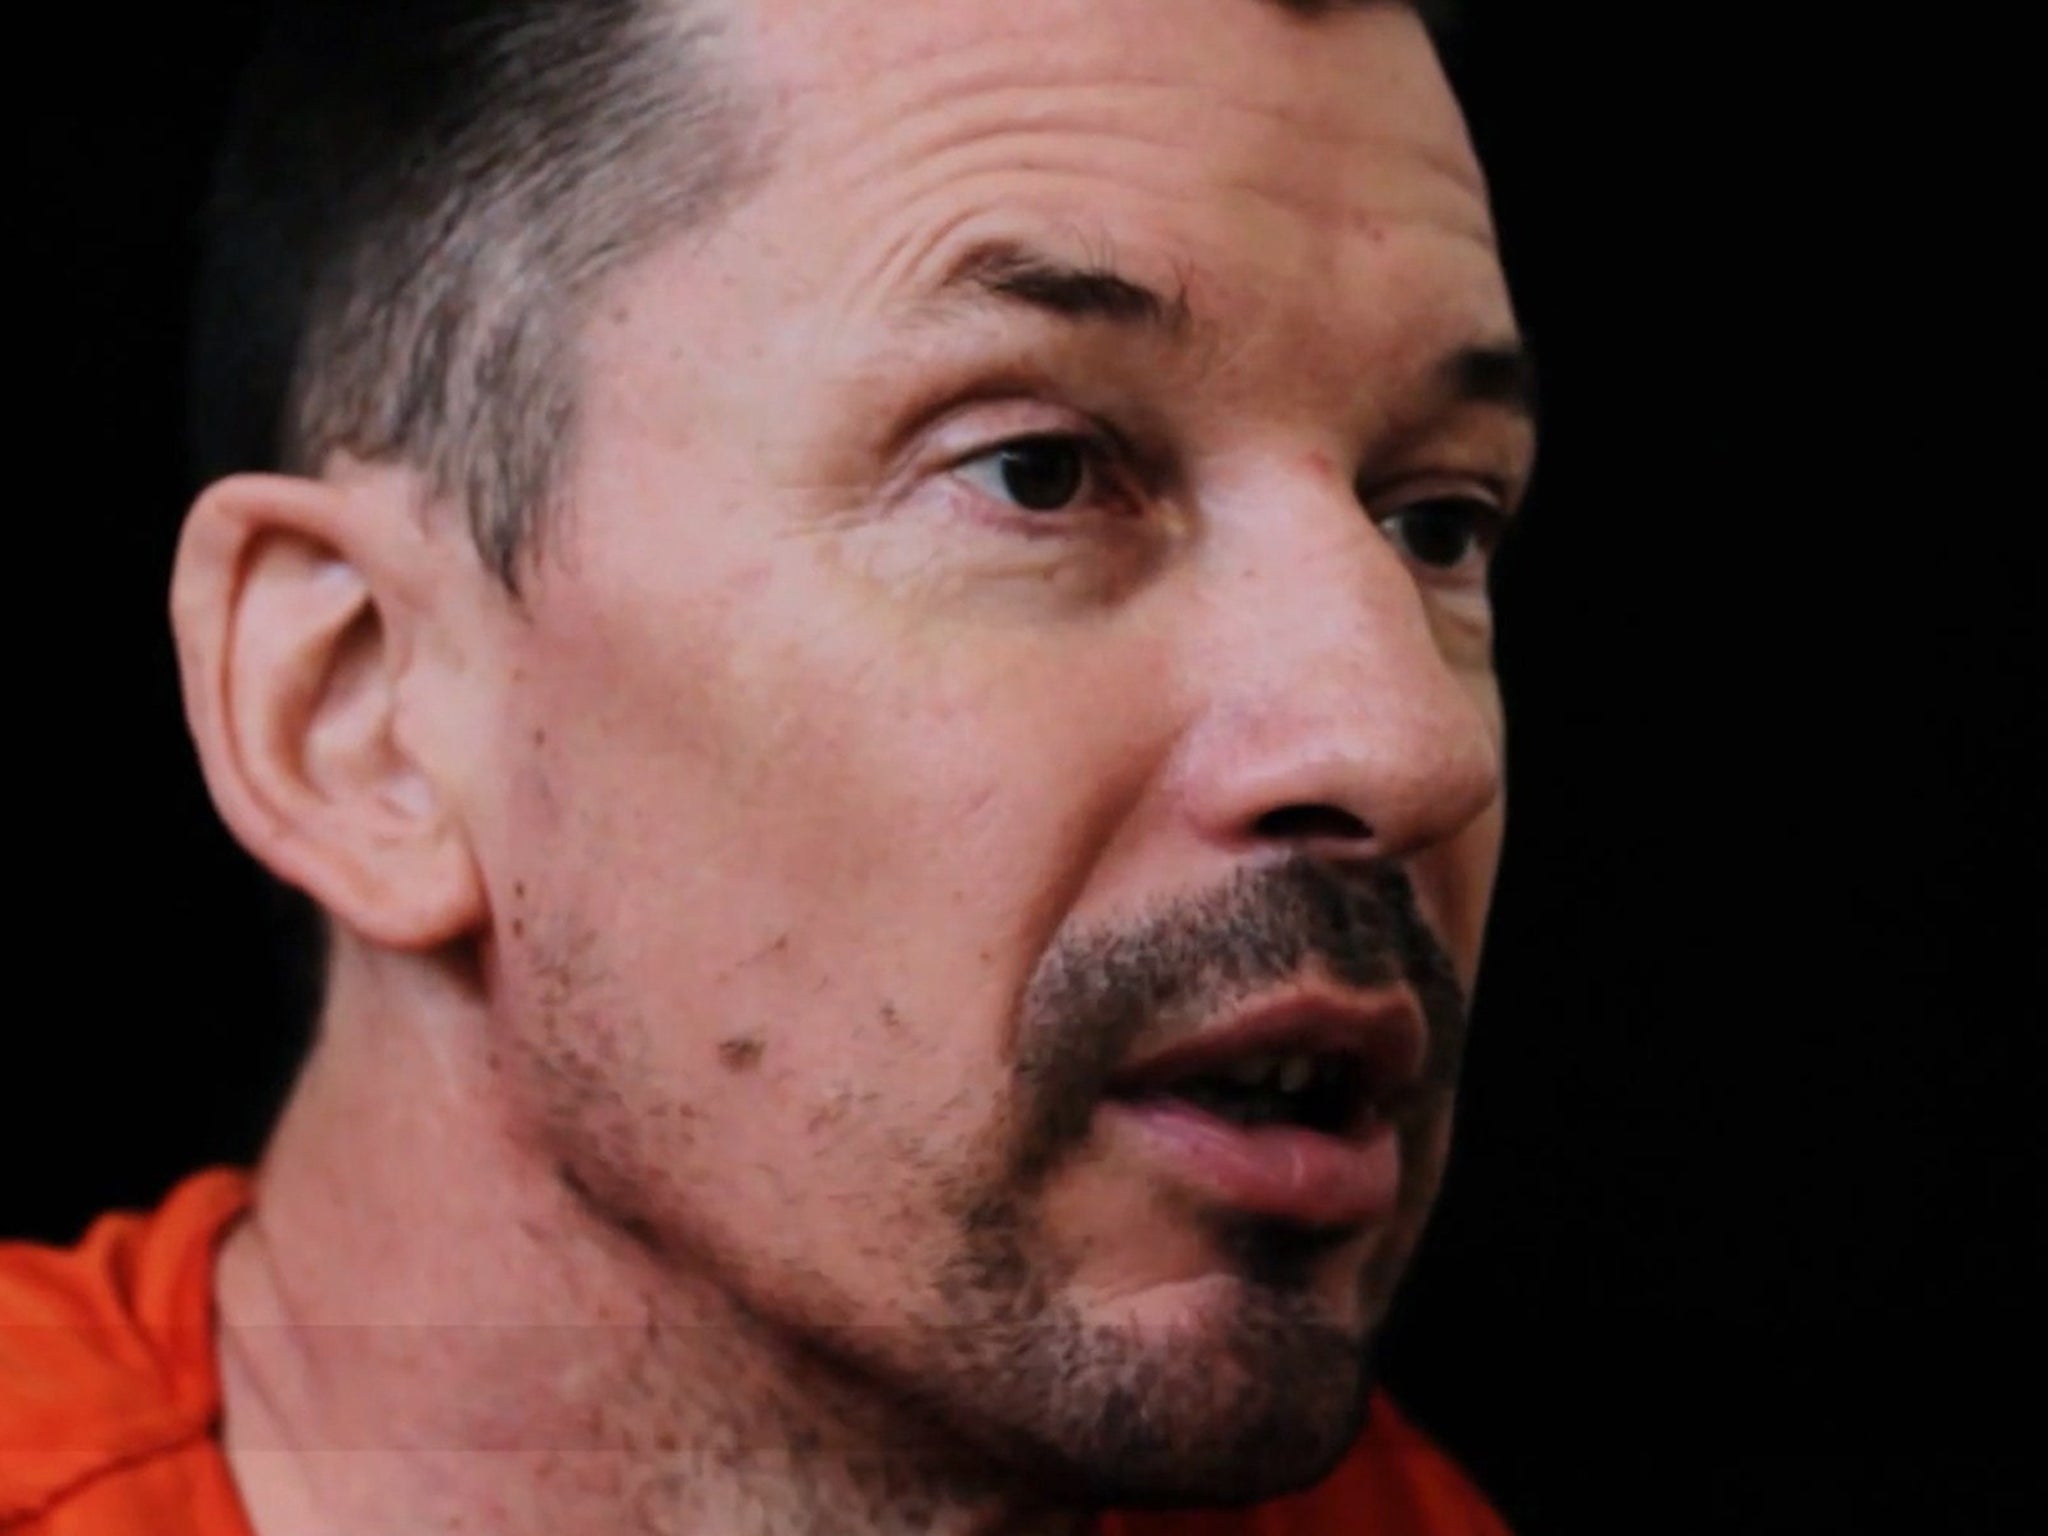 An image grab of journalist John Cantlie taken from a video released by the Islamic State (IS) group through Al-Furqan Media via YouTube